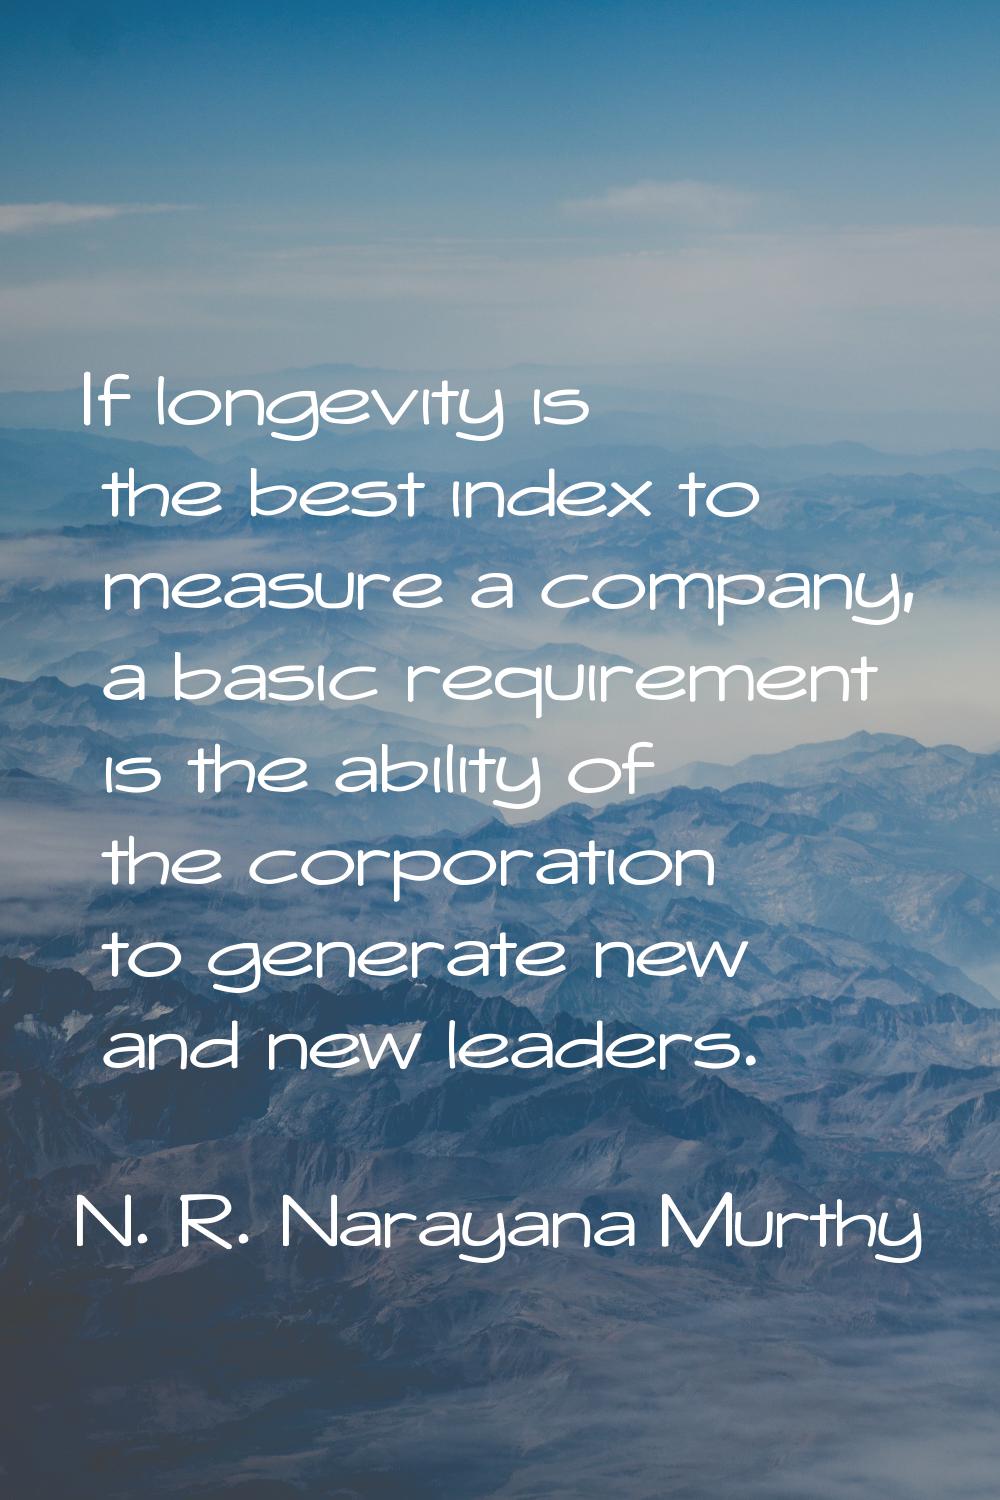 If longevity is the best index to measure a company, a basic requirement is the ability of the corp